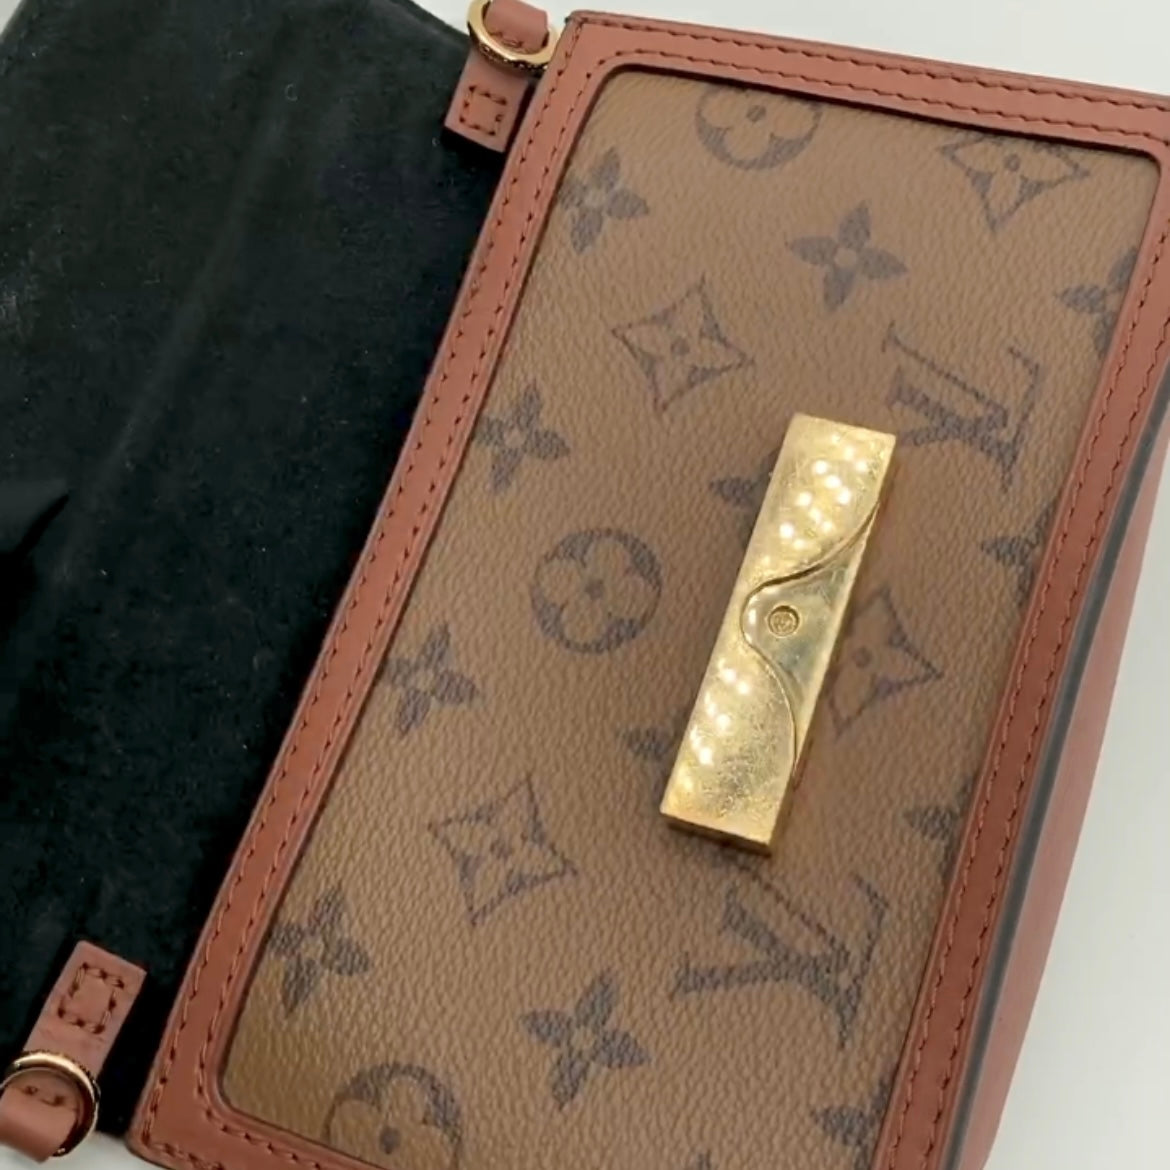 Products by Louis Vuitton: Dauphine Chain Wallet  Wallet chain, Louis  vuitton, Louis vuitton store